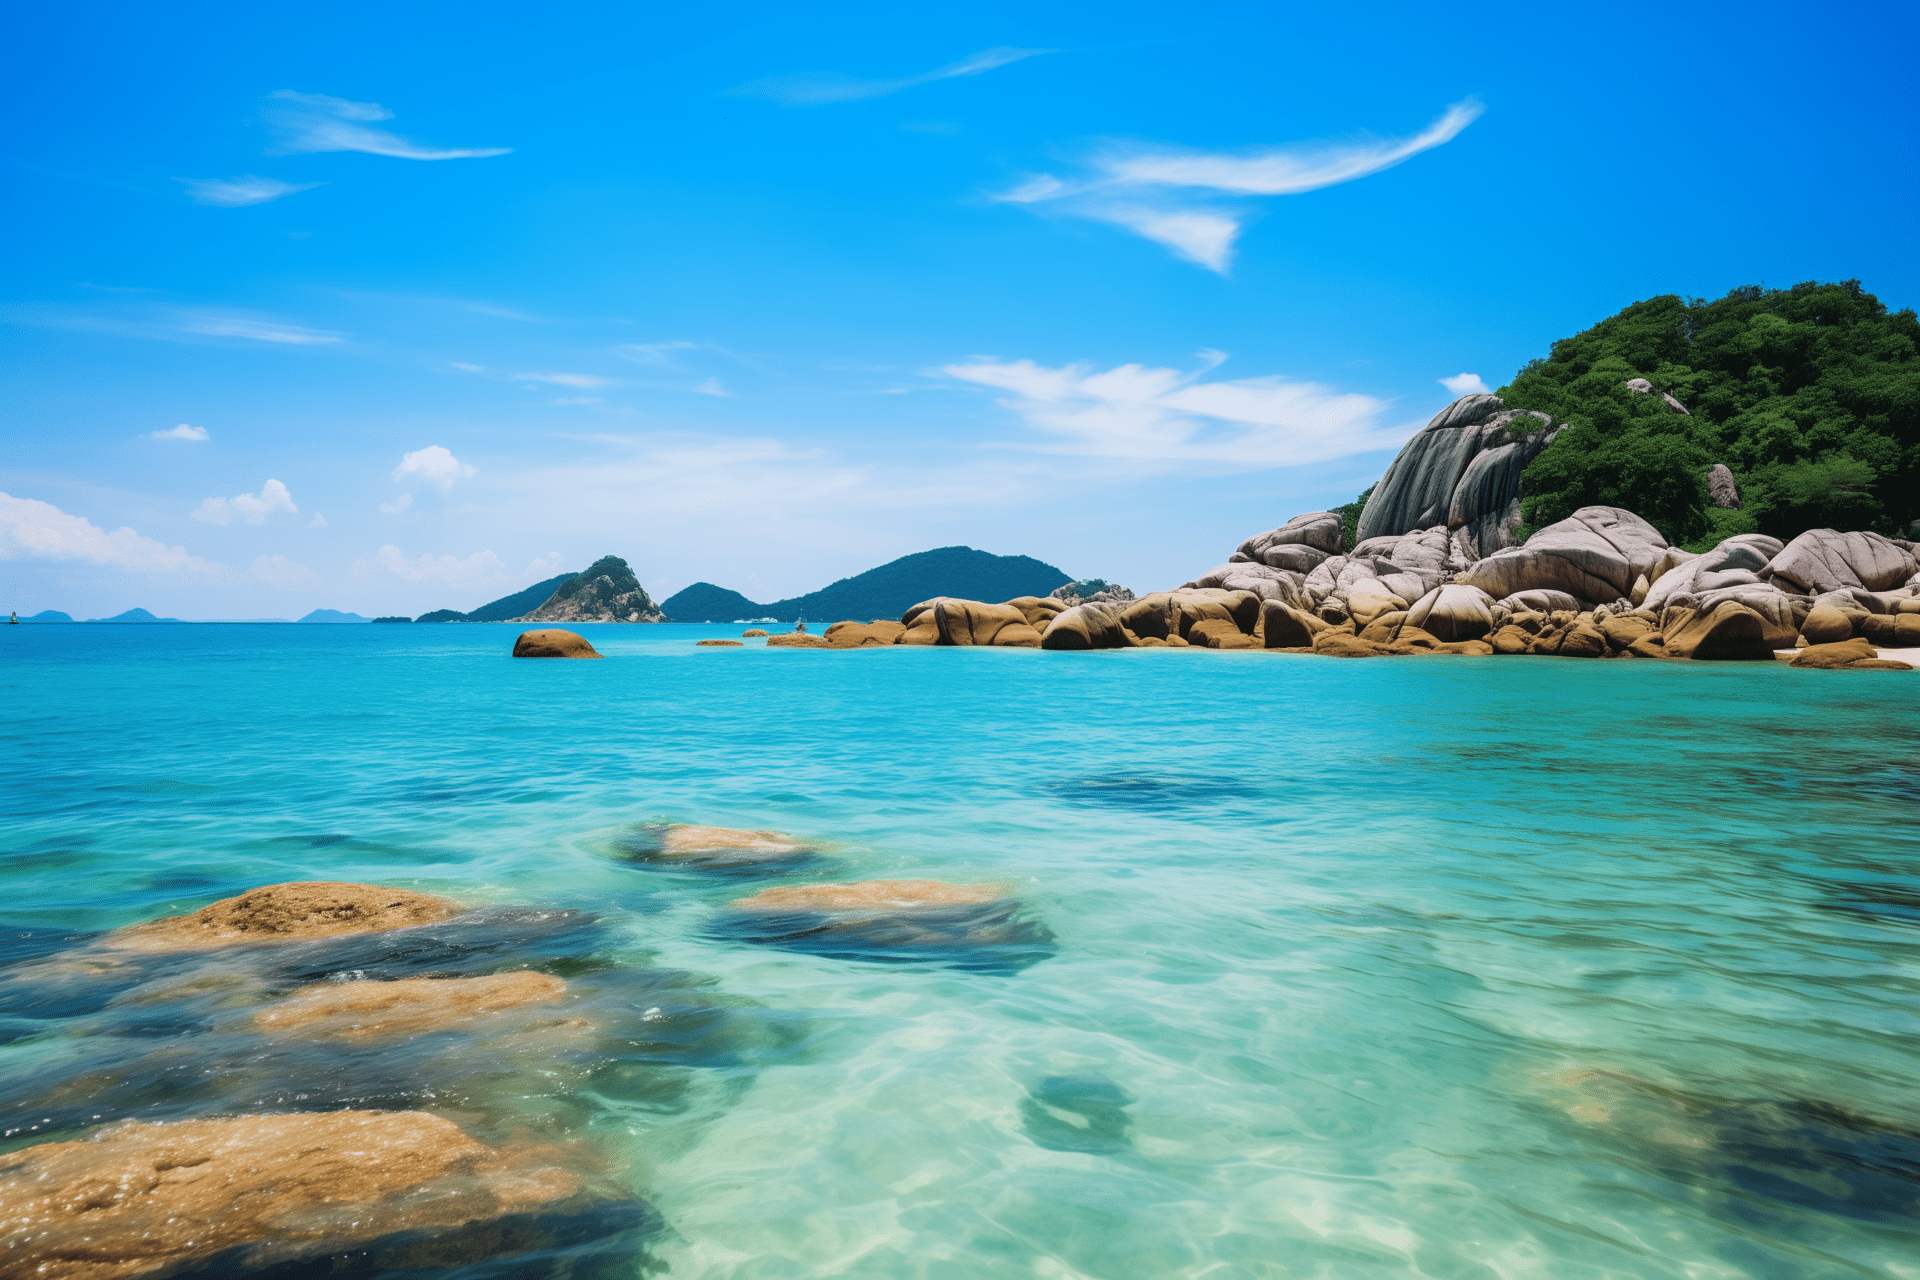 Discover the crystal clear waters and blue elegant skies of Koh Samui in Thailand